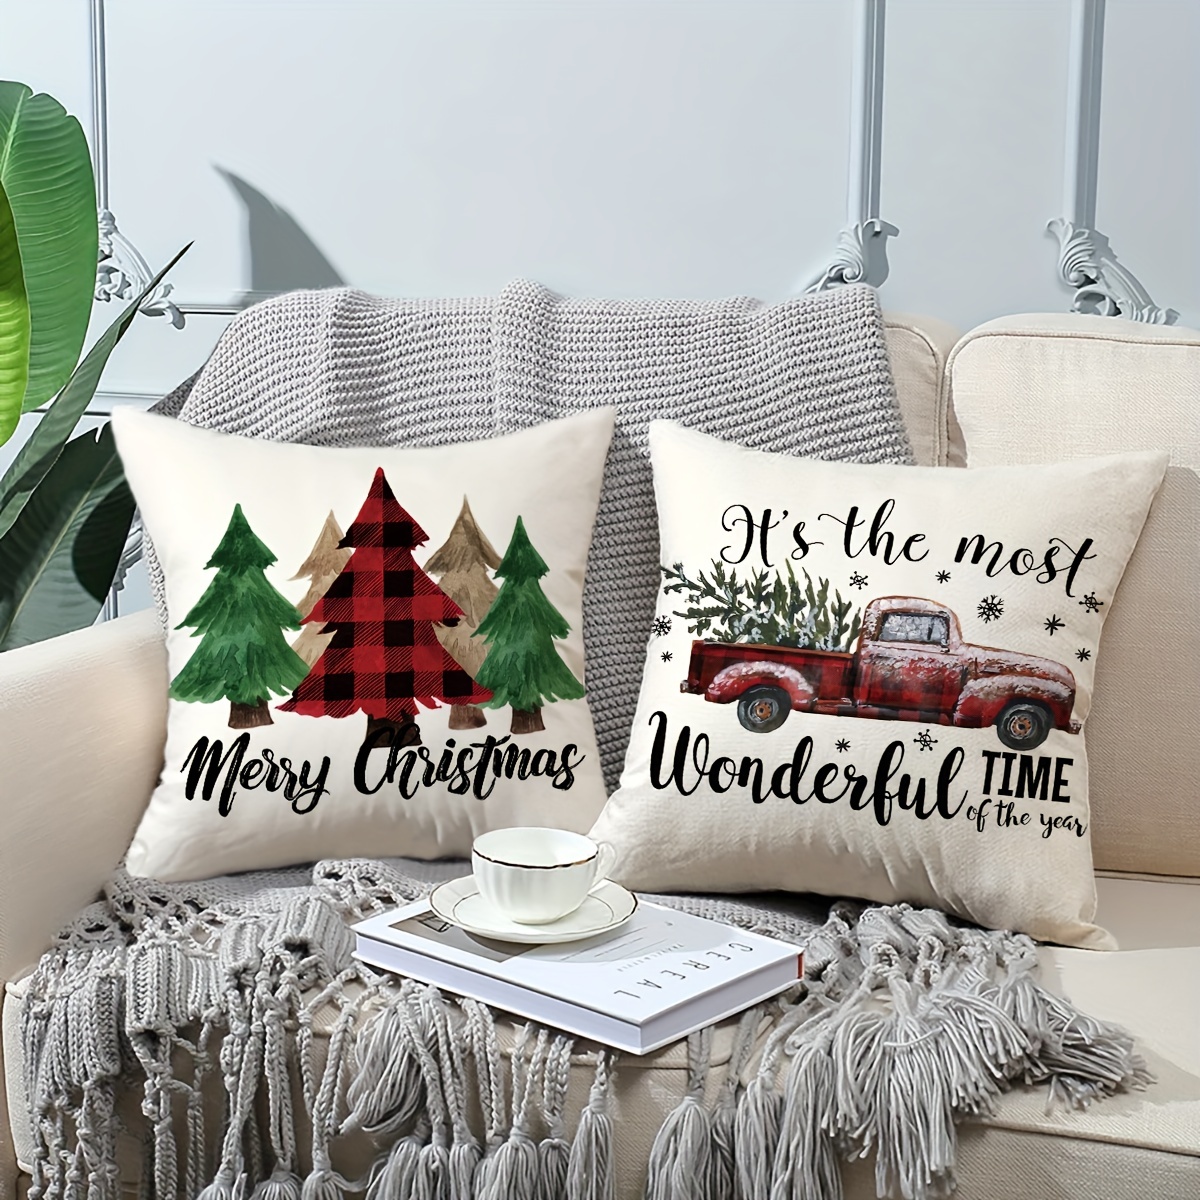 Christmas Pillow Covers - Set of 4 Throw Pillow Covers, 18 x 18 Inches  Pillow Cover, Red Plaid Throw Pillow Covers, Decorative Pillows Sofa for Couch  Christmas Decorations, Red and Black 